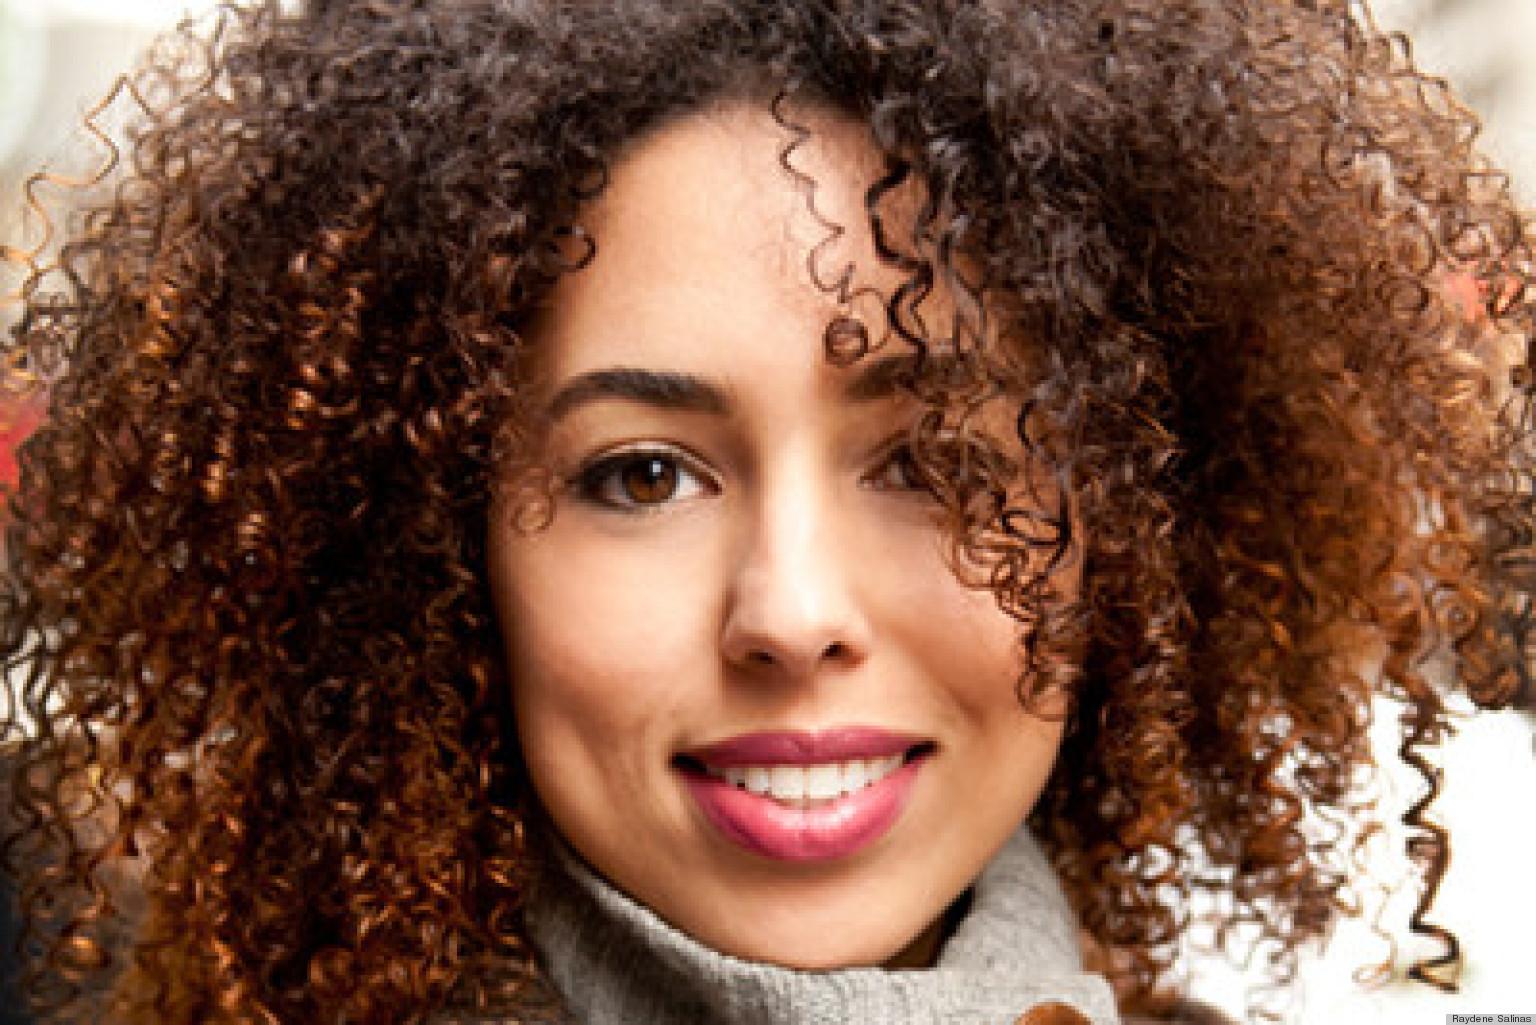 Linette Torres, Certified Bra Fitter, Shares Naturally Curly Hair Tips